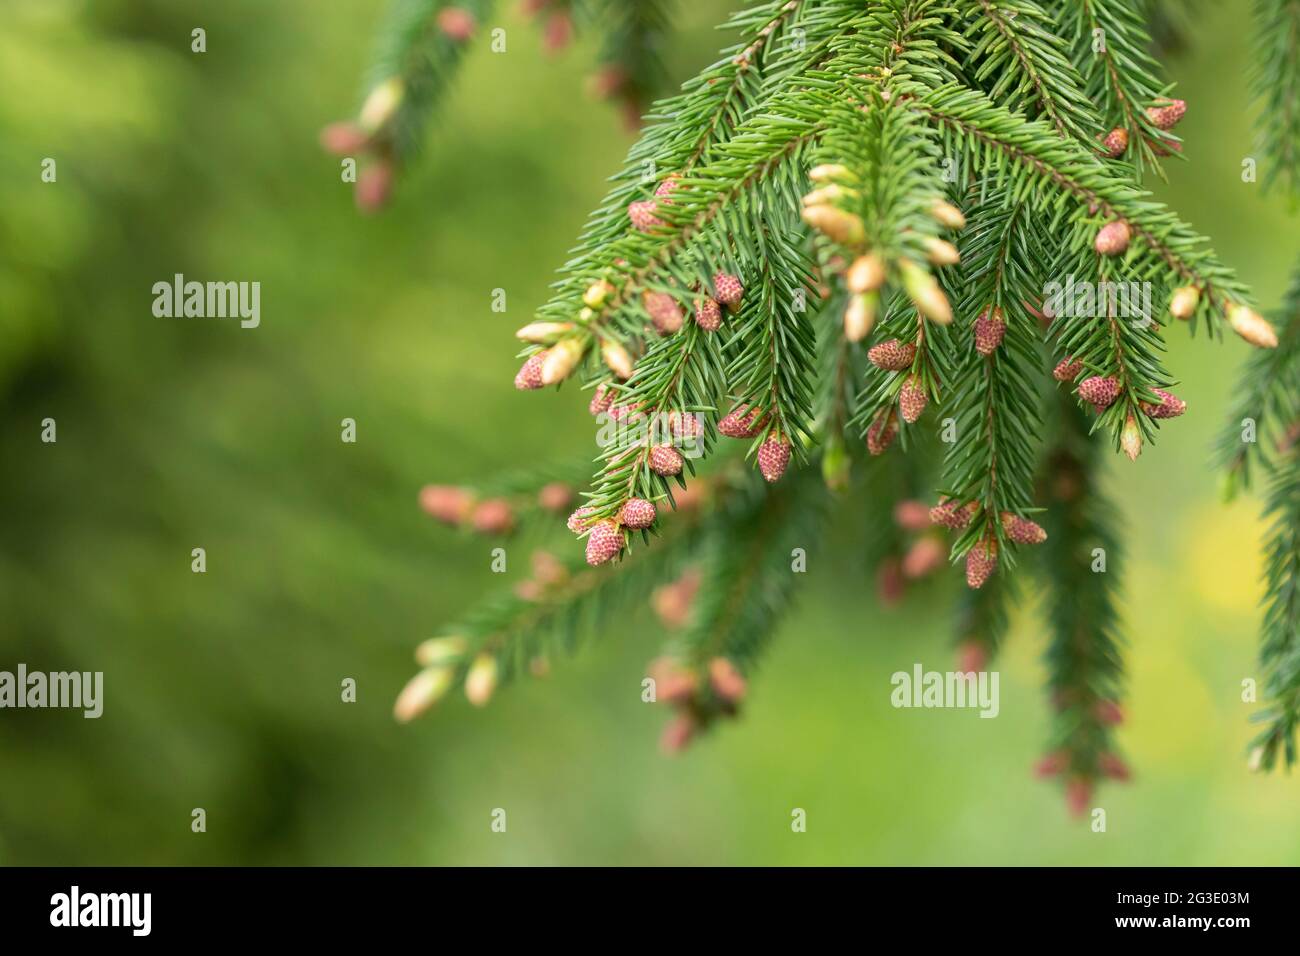 Young male reddish cones on a branch of European spruce (Picea abies) on a natural green background close-up Stock Photo